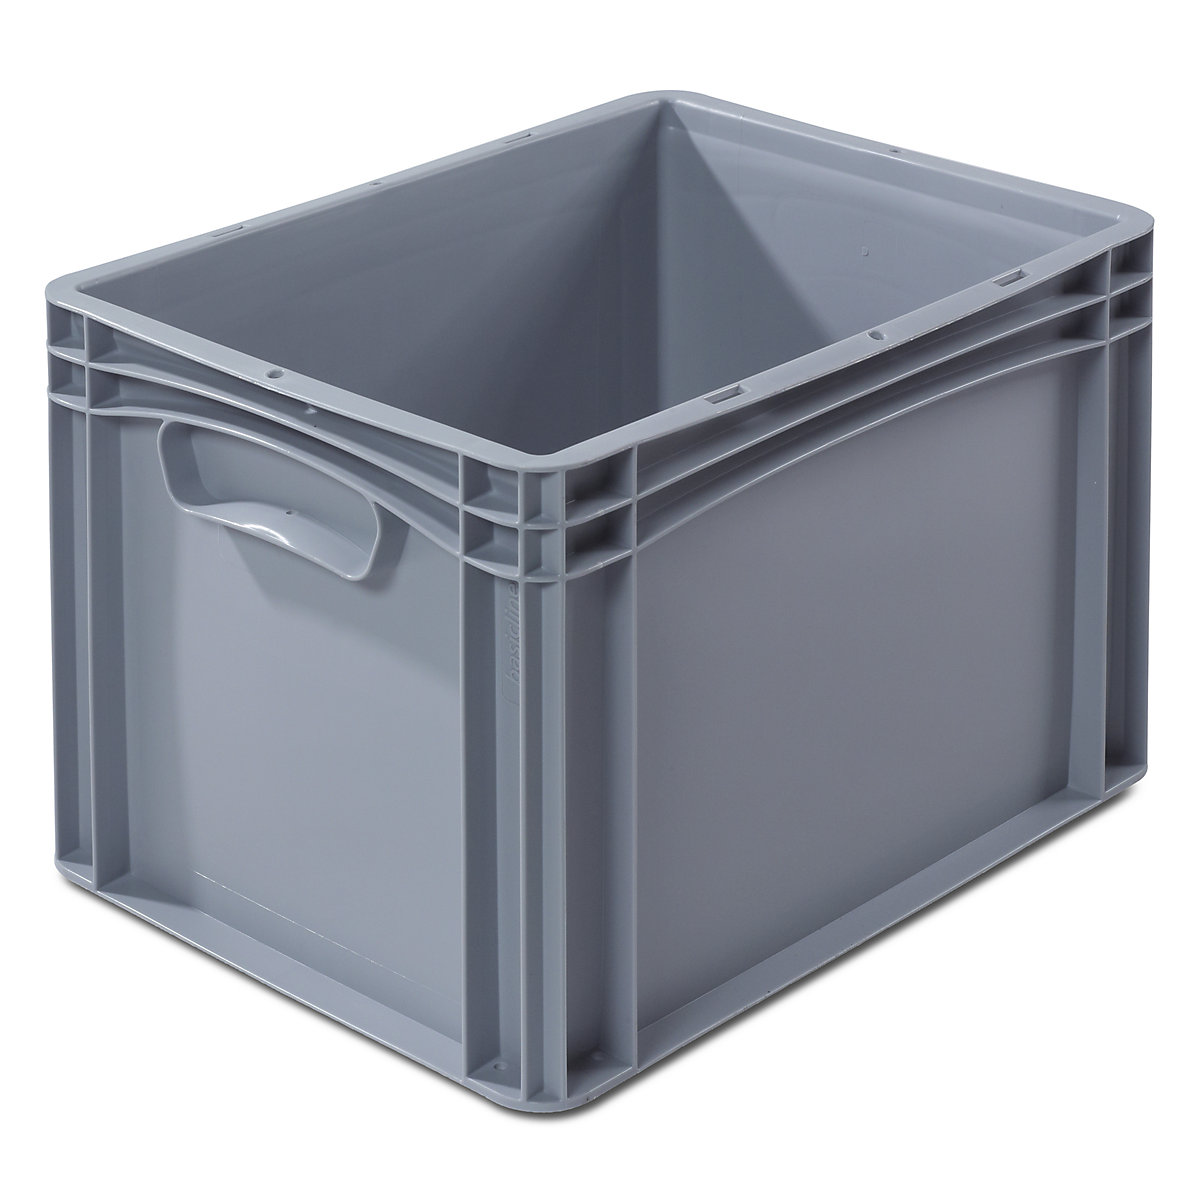 Euro size container, LxW 400 x 300 mm, solid walls and base, height 270 mm-5